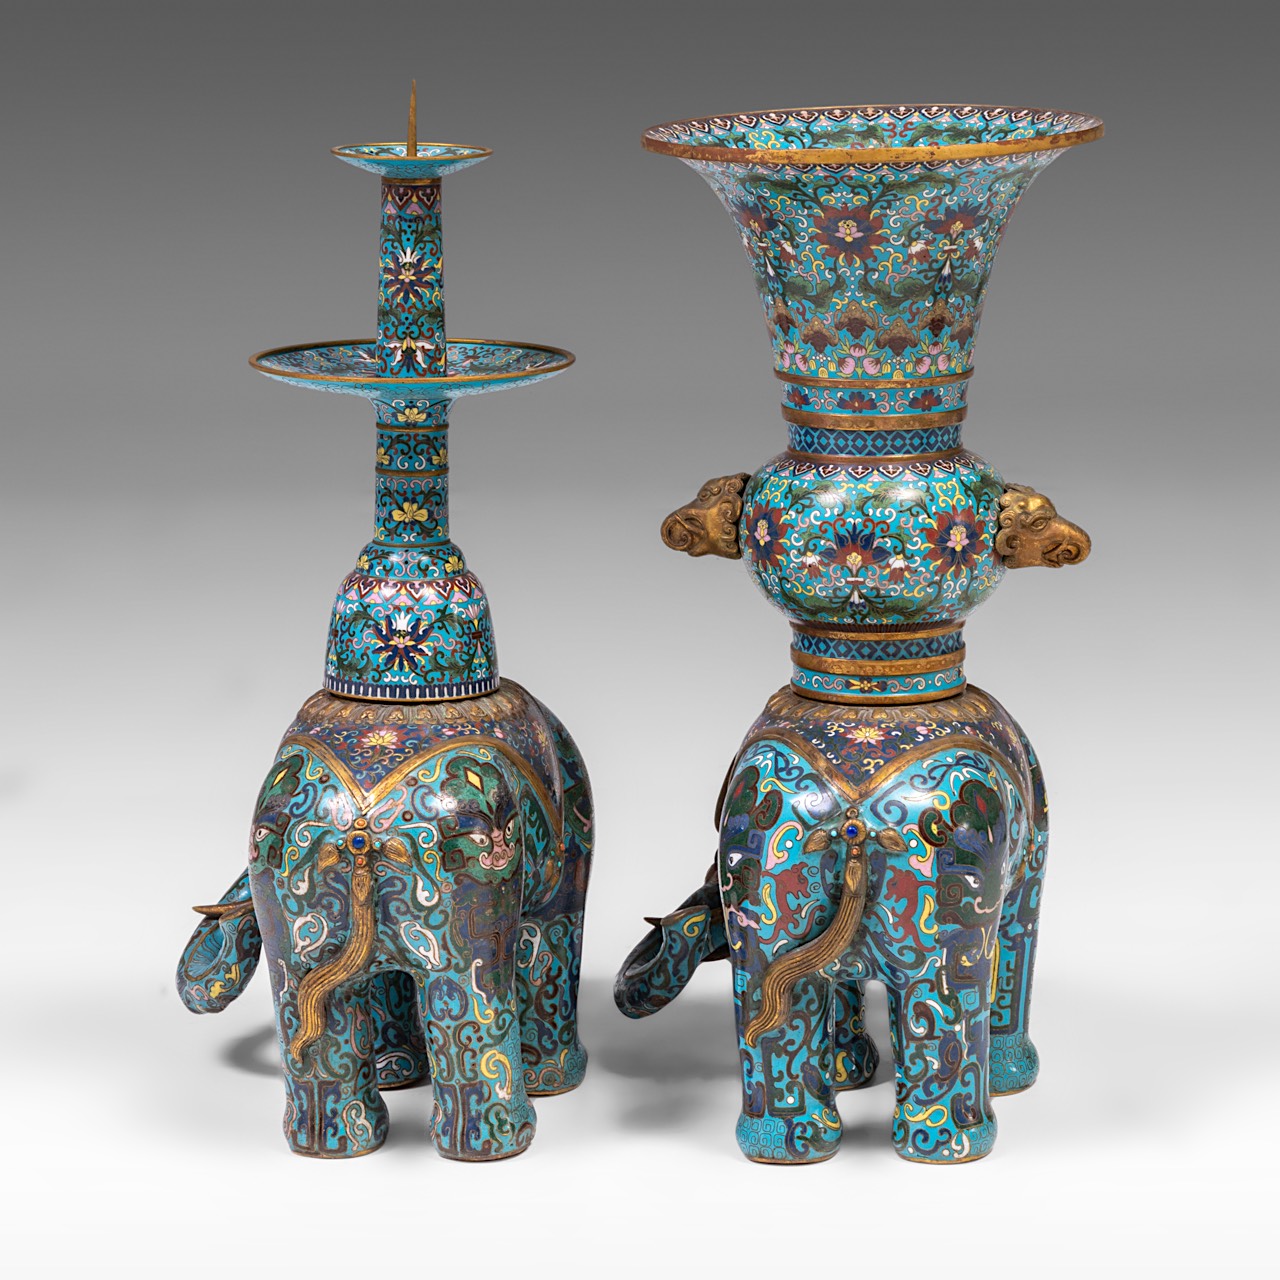 A Chinese five-piece semi-precious stone inlaid cloisonne garniture, late Qing/20thC, tallest H 58 - - Image 19 of 24